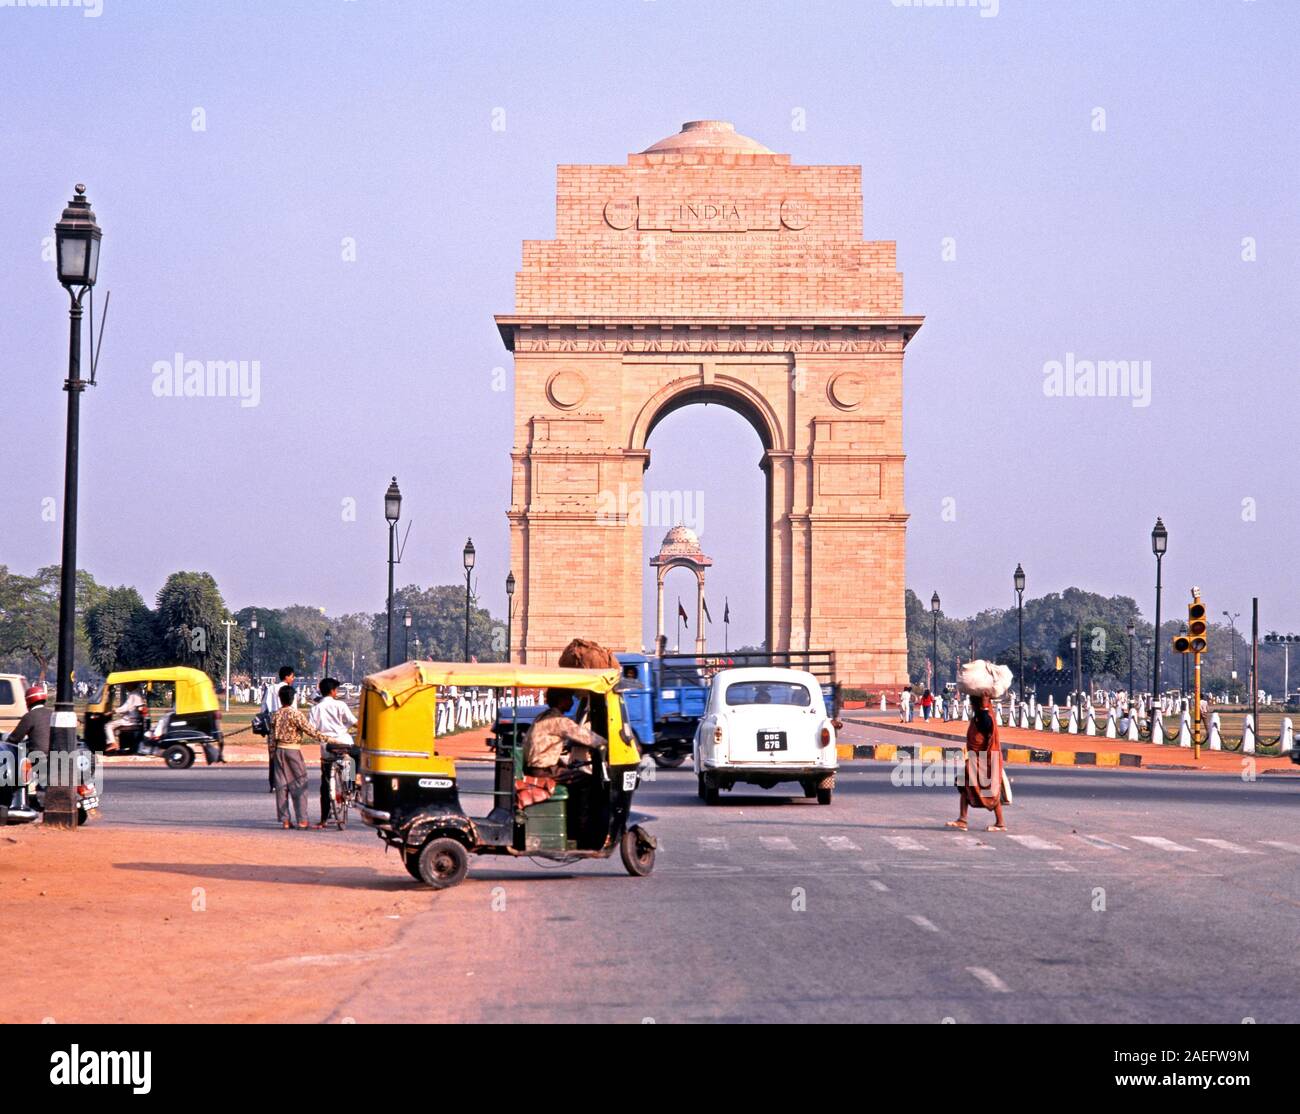 View of India Gate with local people and traffic in the foreground, Delhi, Delhi Union Territory, India. Stock Photo